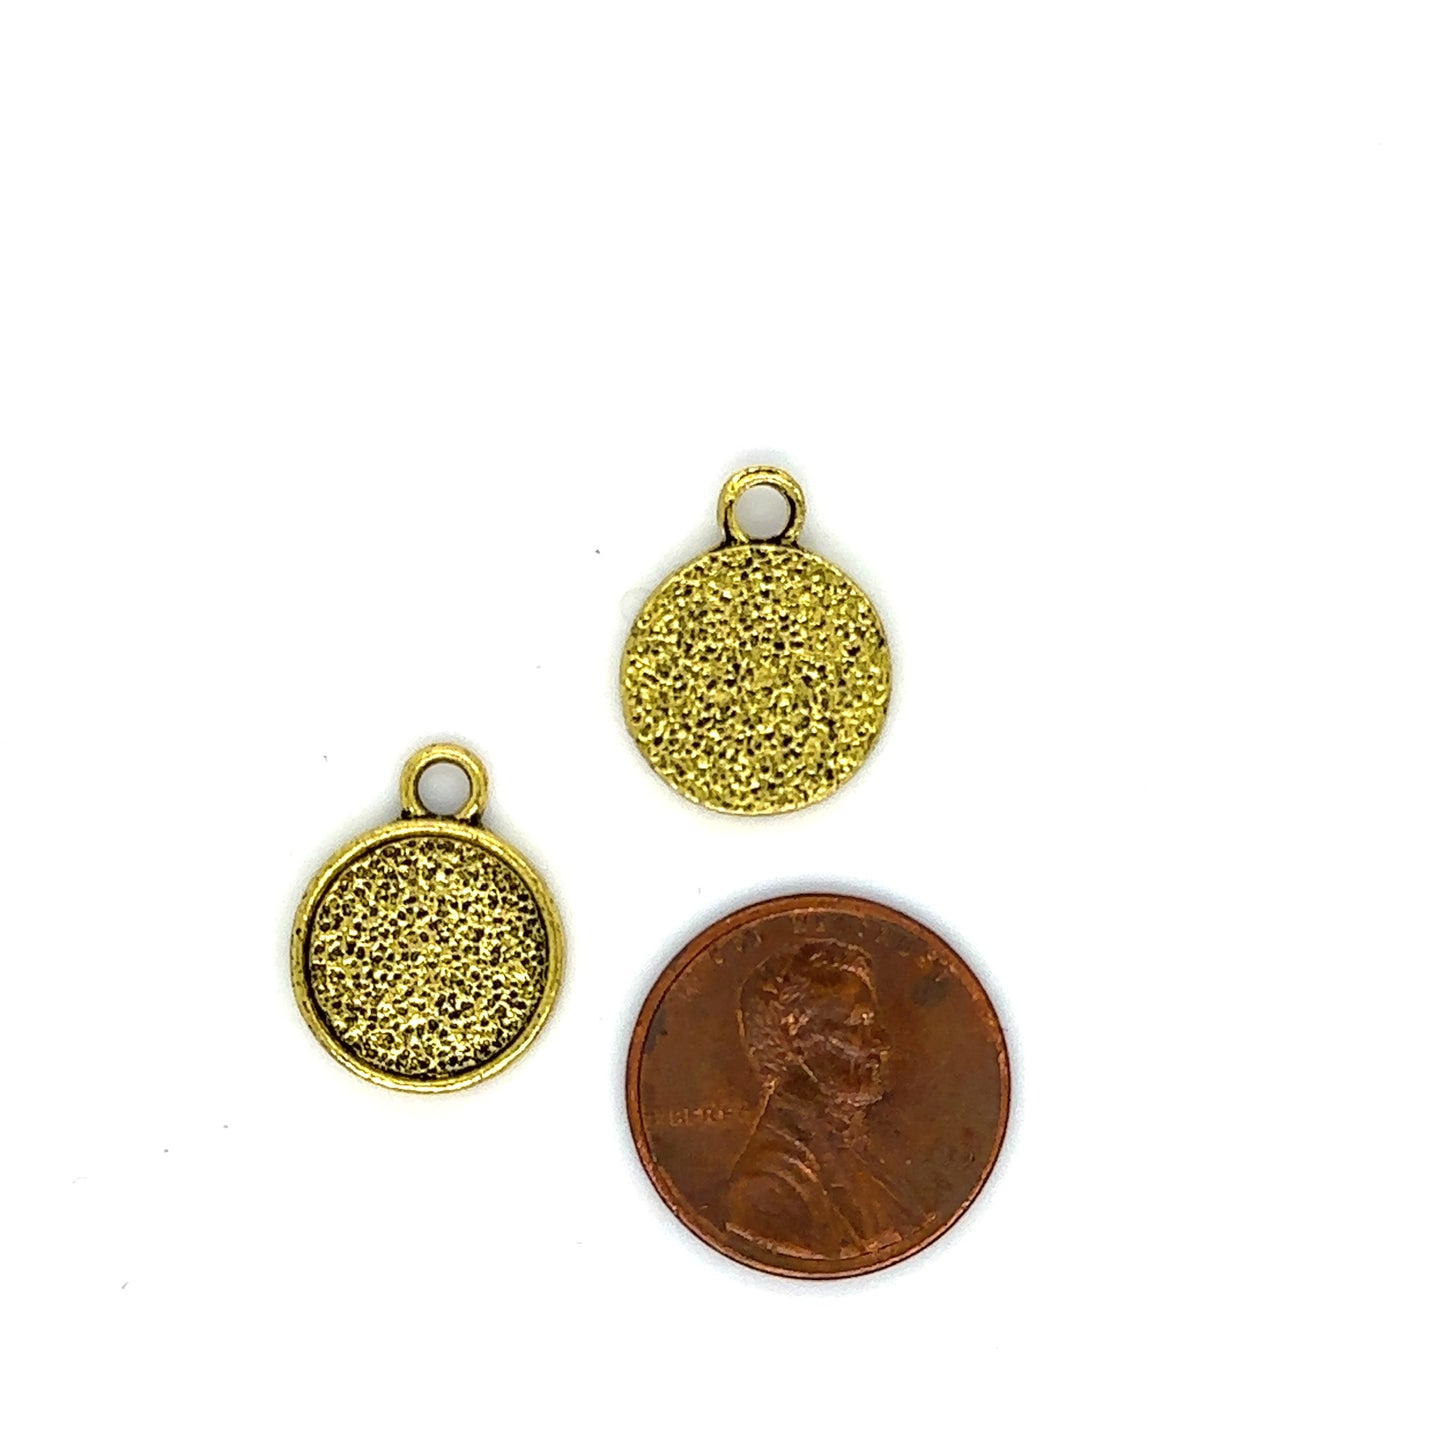 12mm small round jewelry making supplies charm antique gold